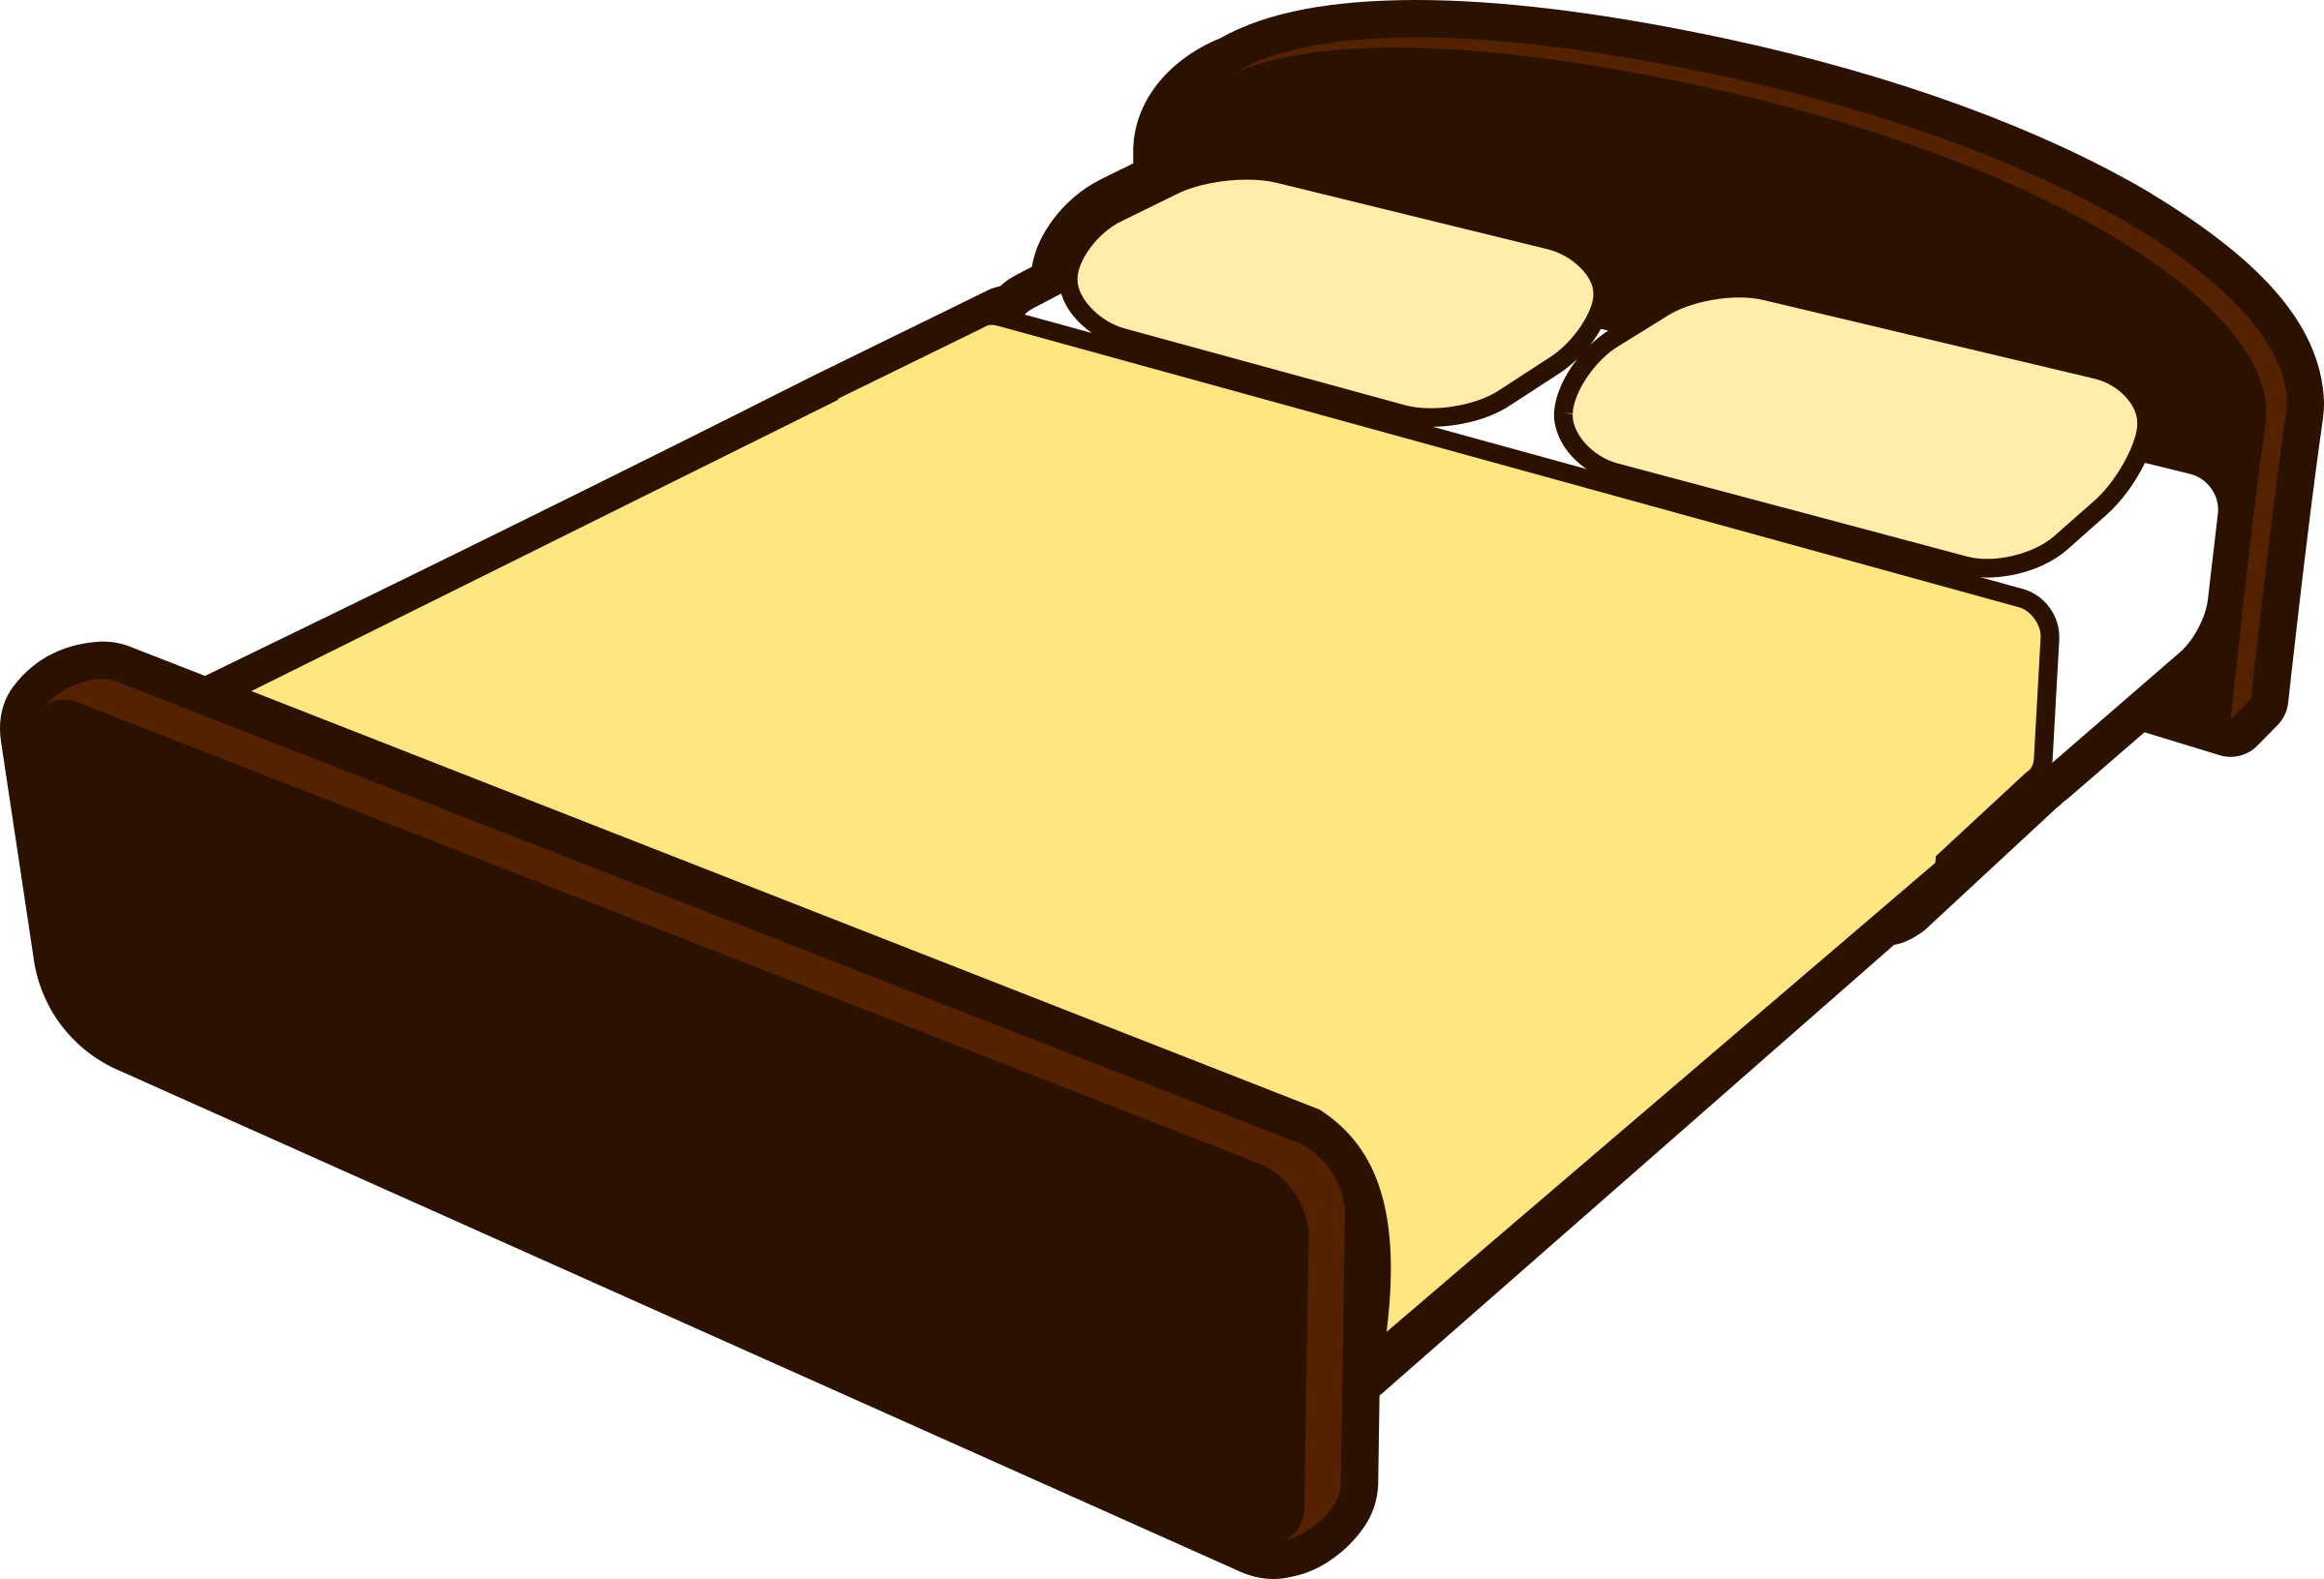 bed clipart